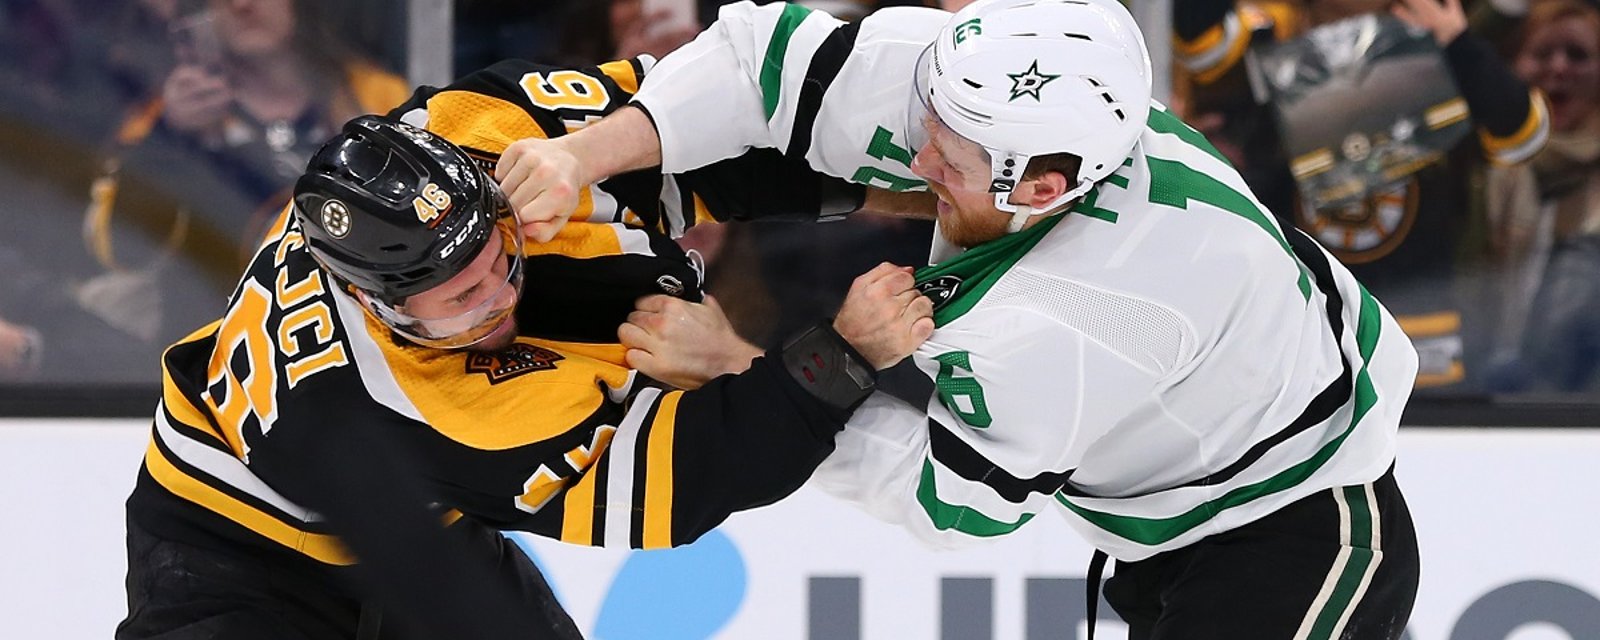 The NHL's top fights of the week.